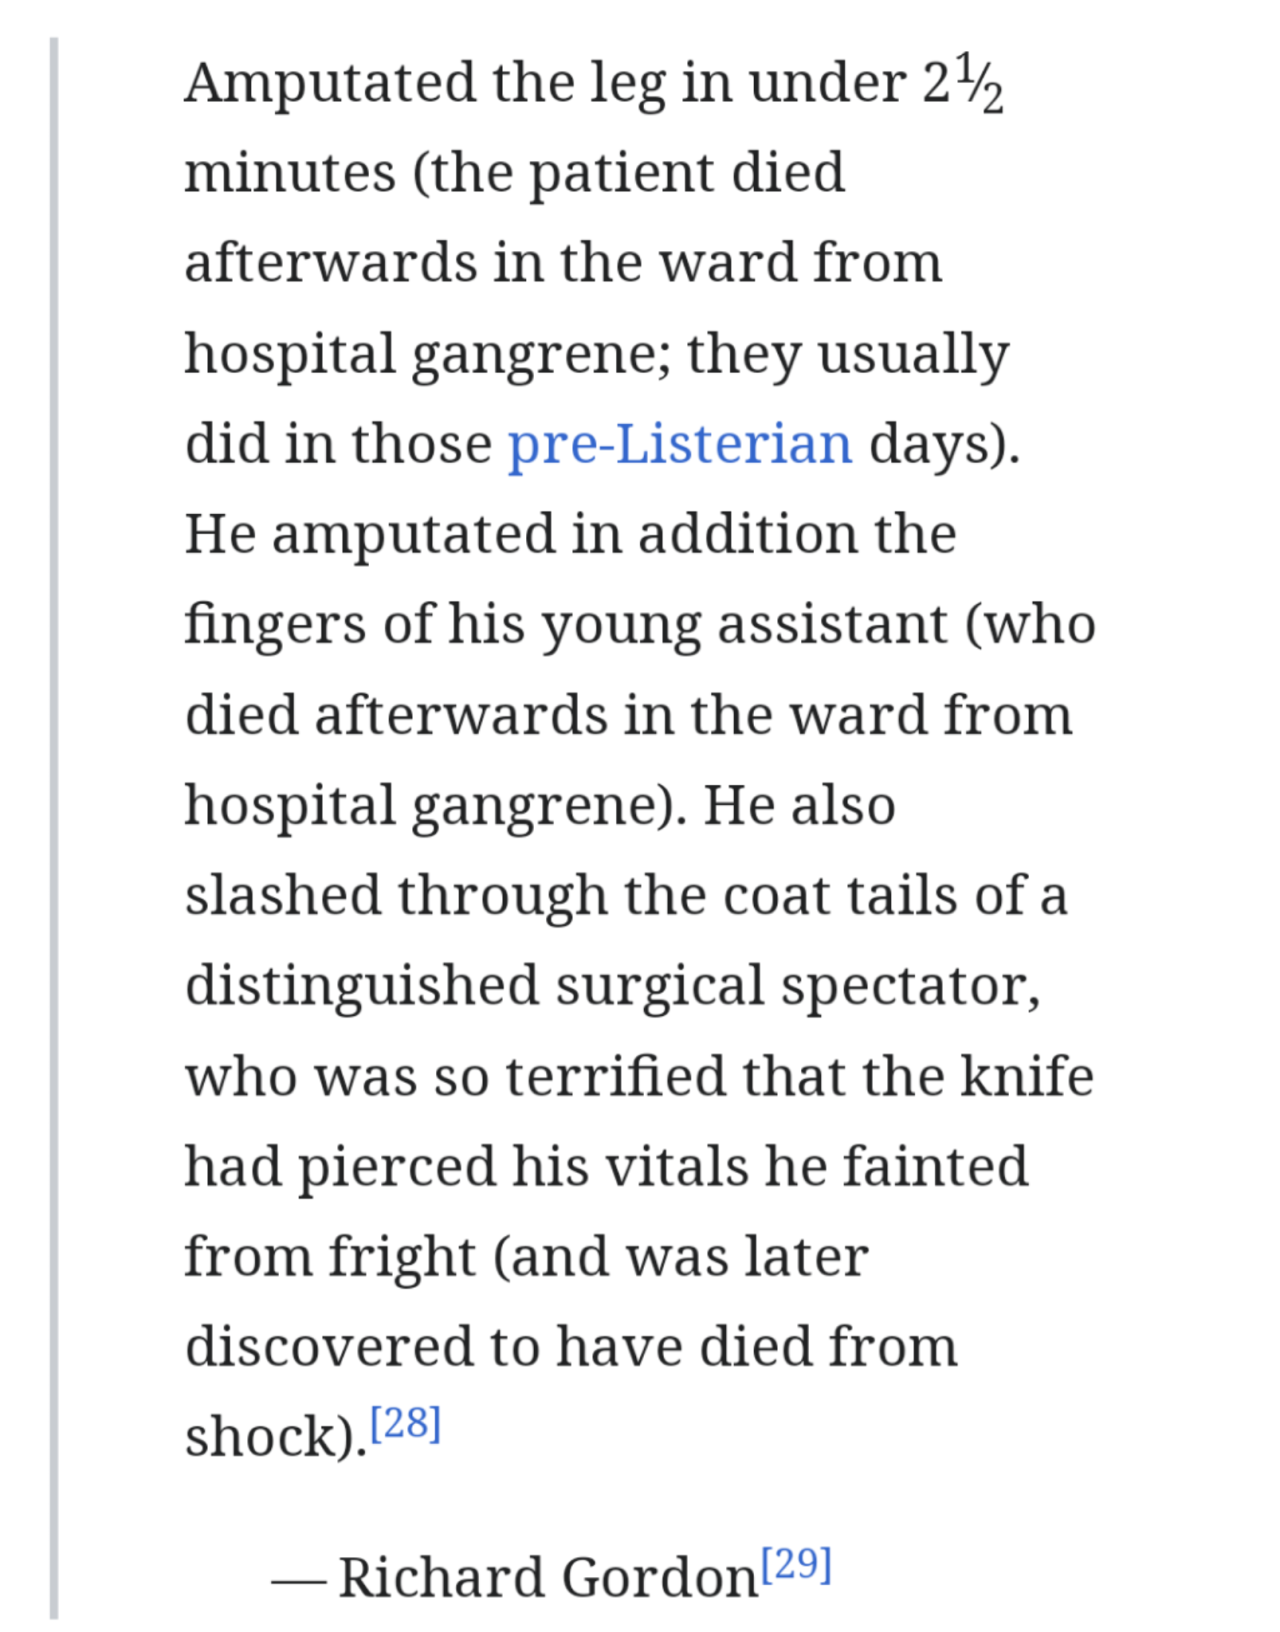 cadaverkeys:st3ll4-st4rstruck:cadaverkeys:The Scottish speedrun surgeon never fails to amuse me. 300% death rate in a surgery hall. One of life’s greatest mysteries and deaths greatest successes. YKNOW. THE SPEEDRUNNING SURGEON WITH A 300% DEATH